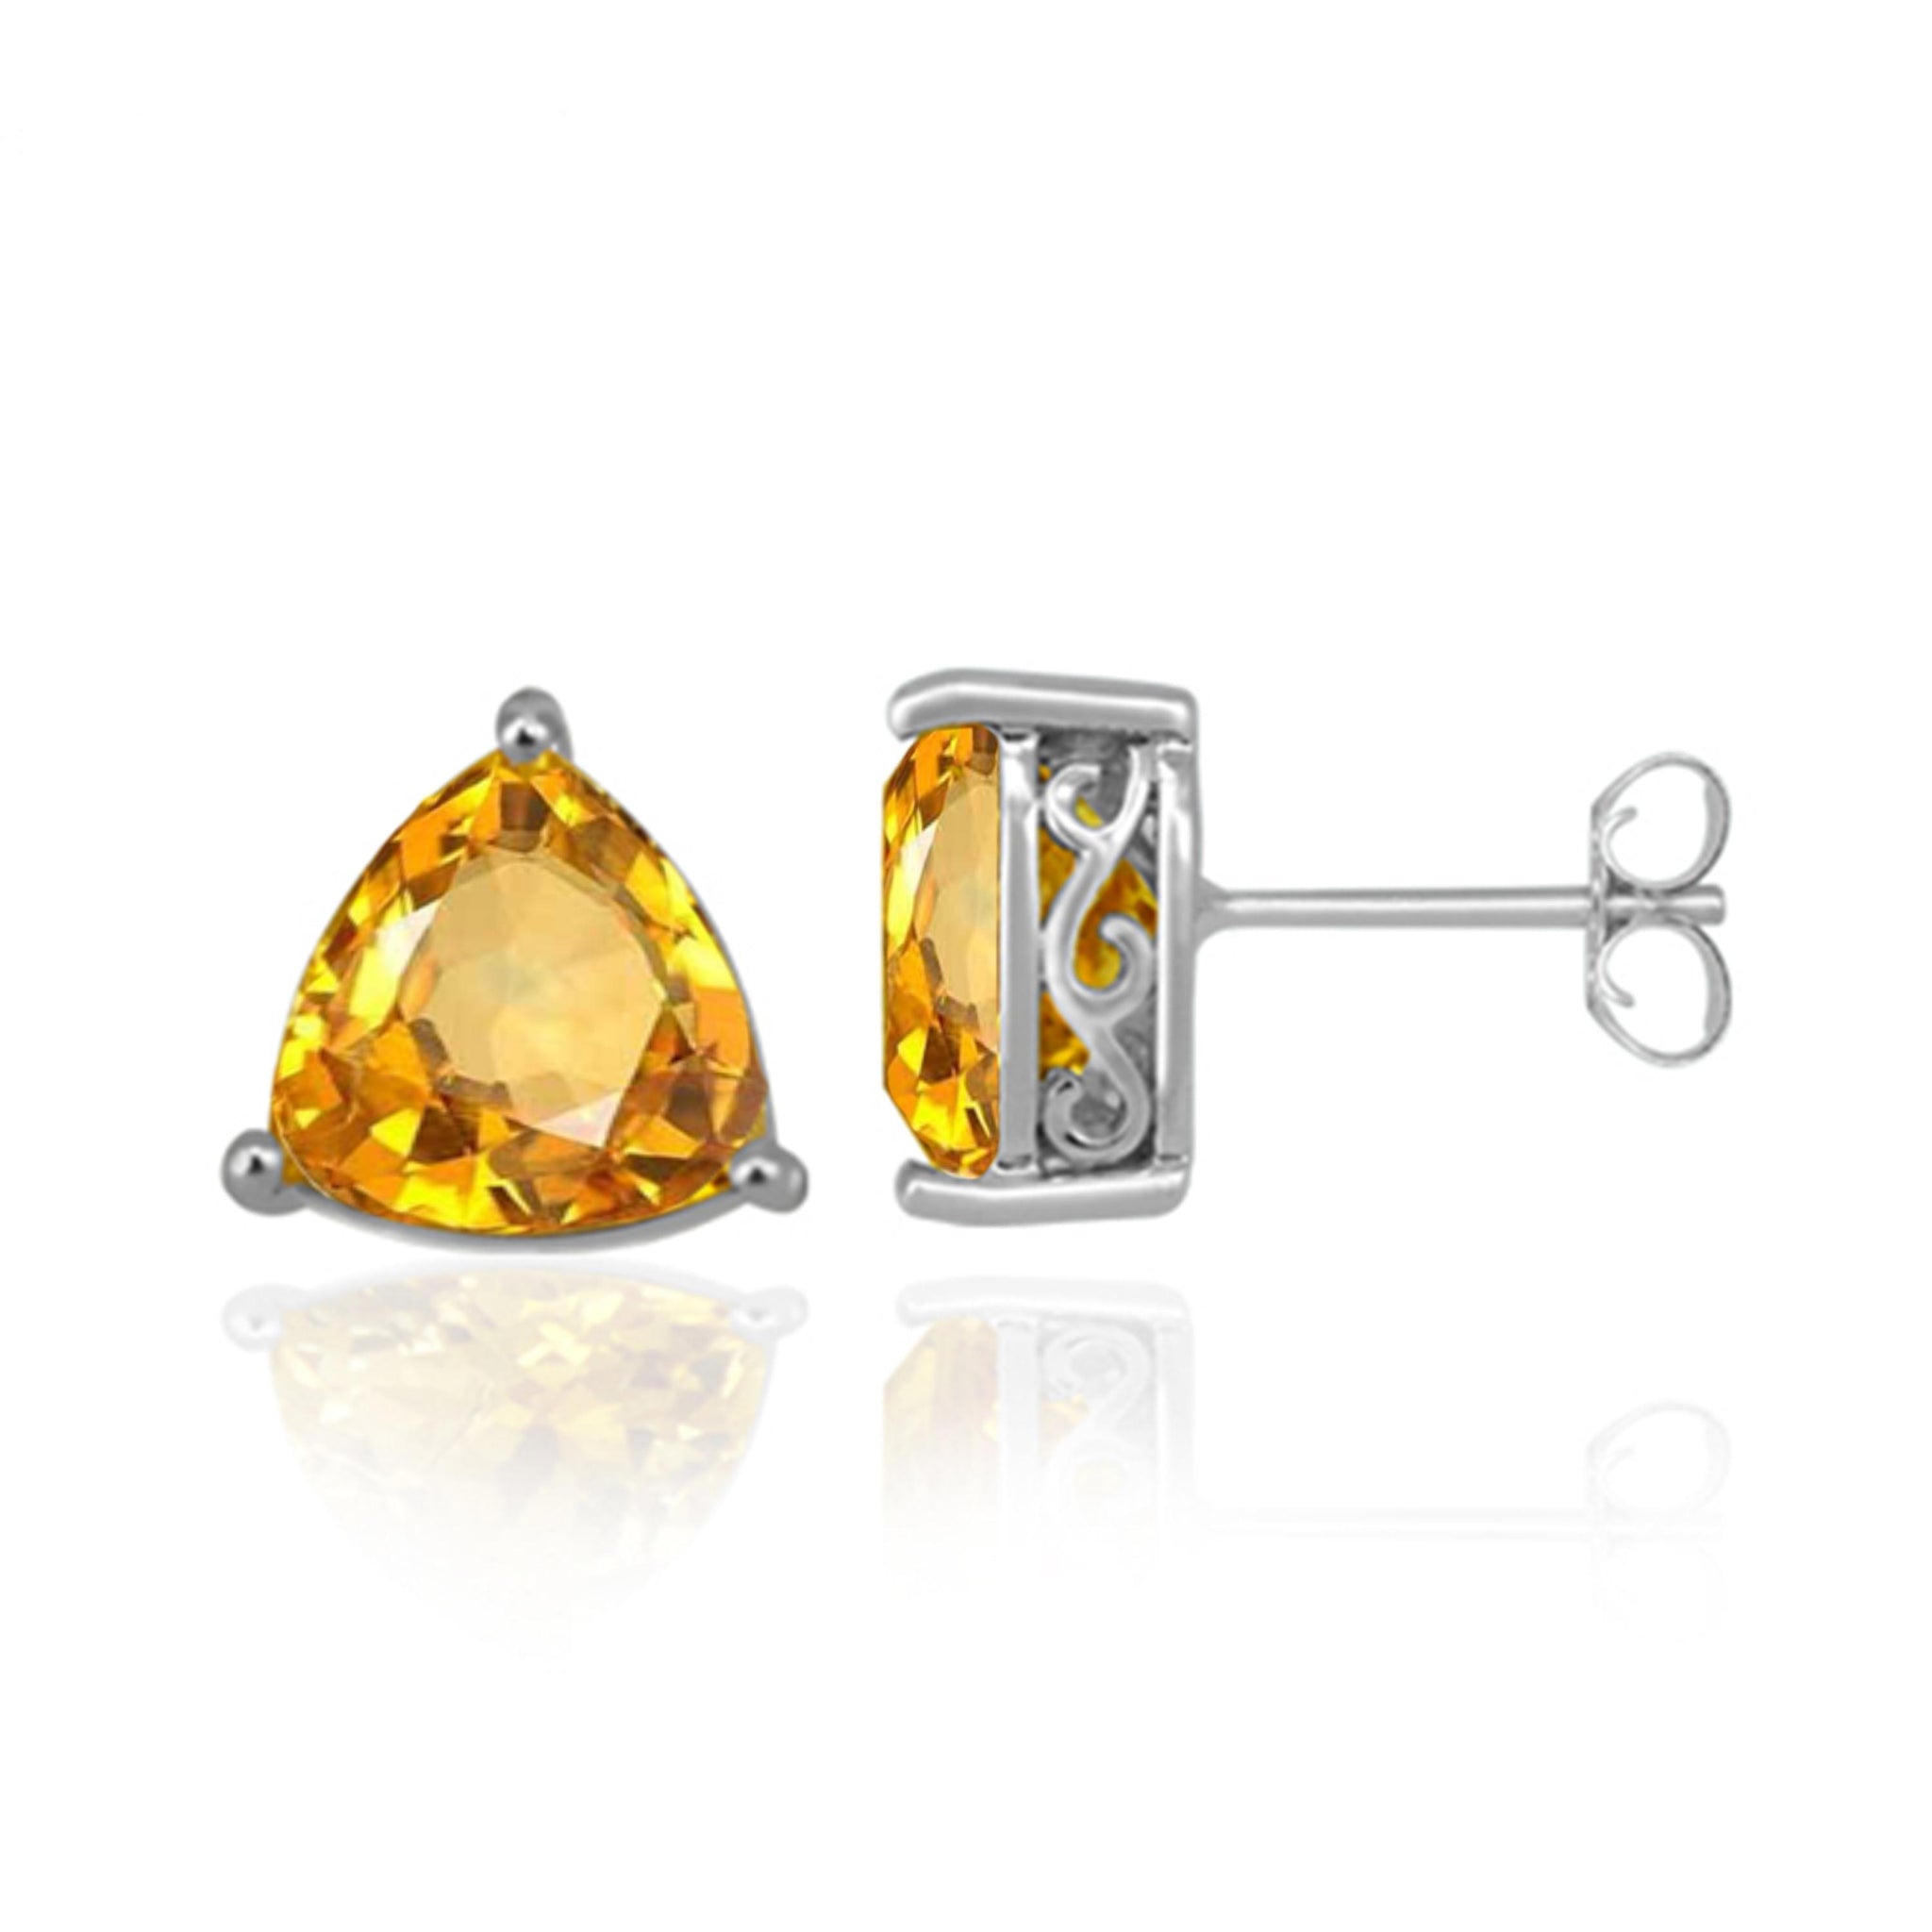 JewelonFire 4.00 Carat T.G.W. Citrine and Sterling Silver Stud Earrings